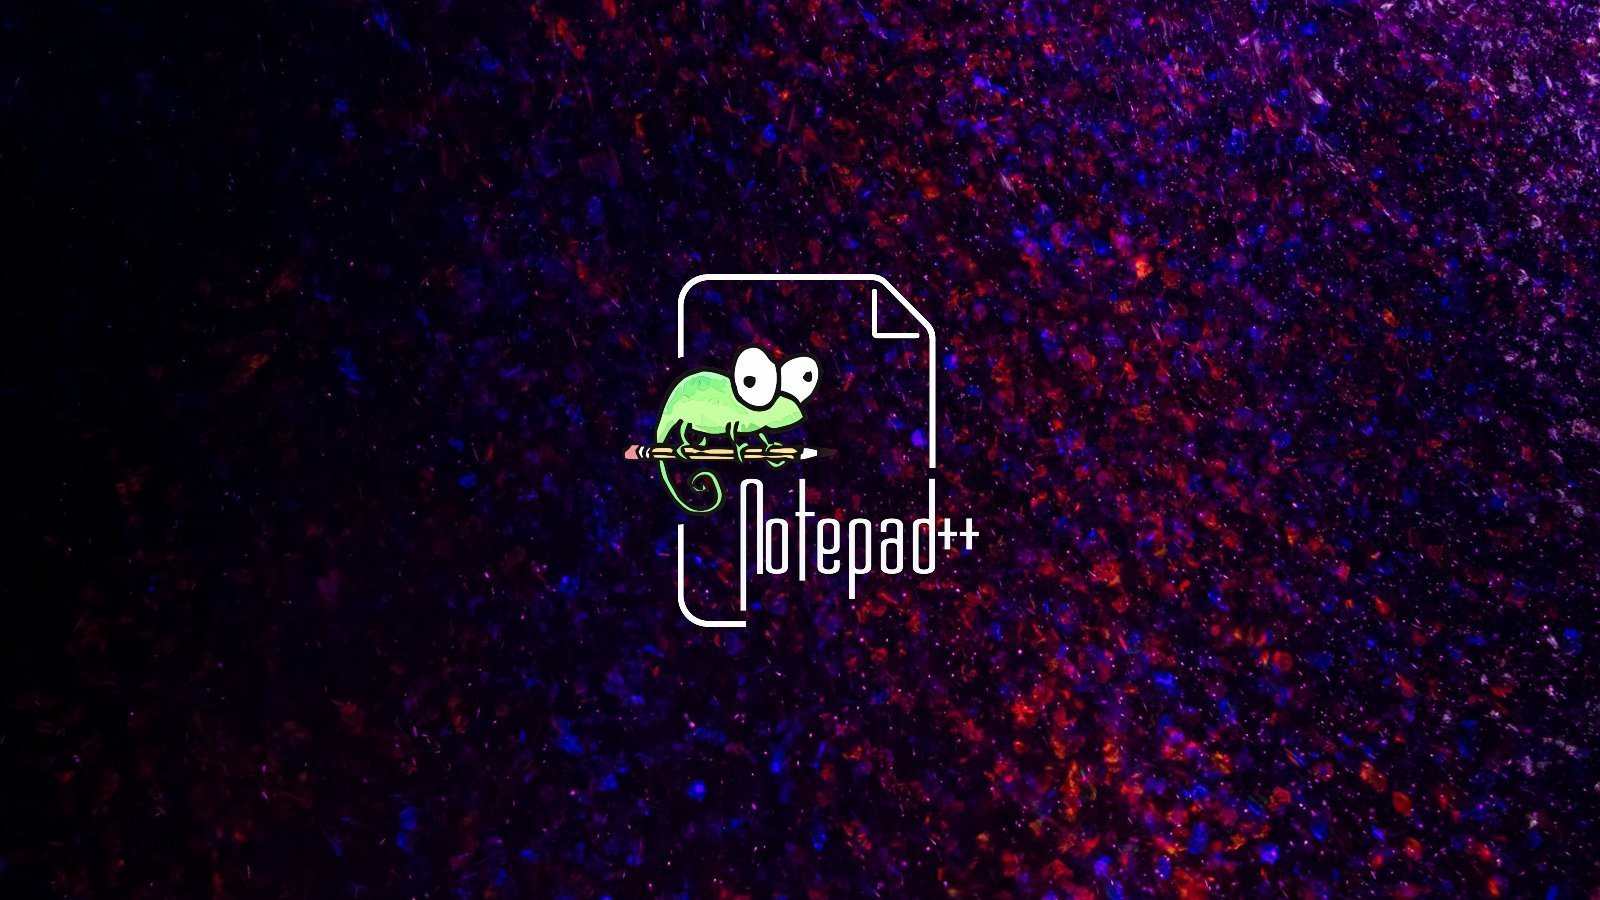 Notepad++ 8.5.7 released with fixes for four security vulnerabilities – Source: www.bleepingcomputer.com